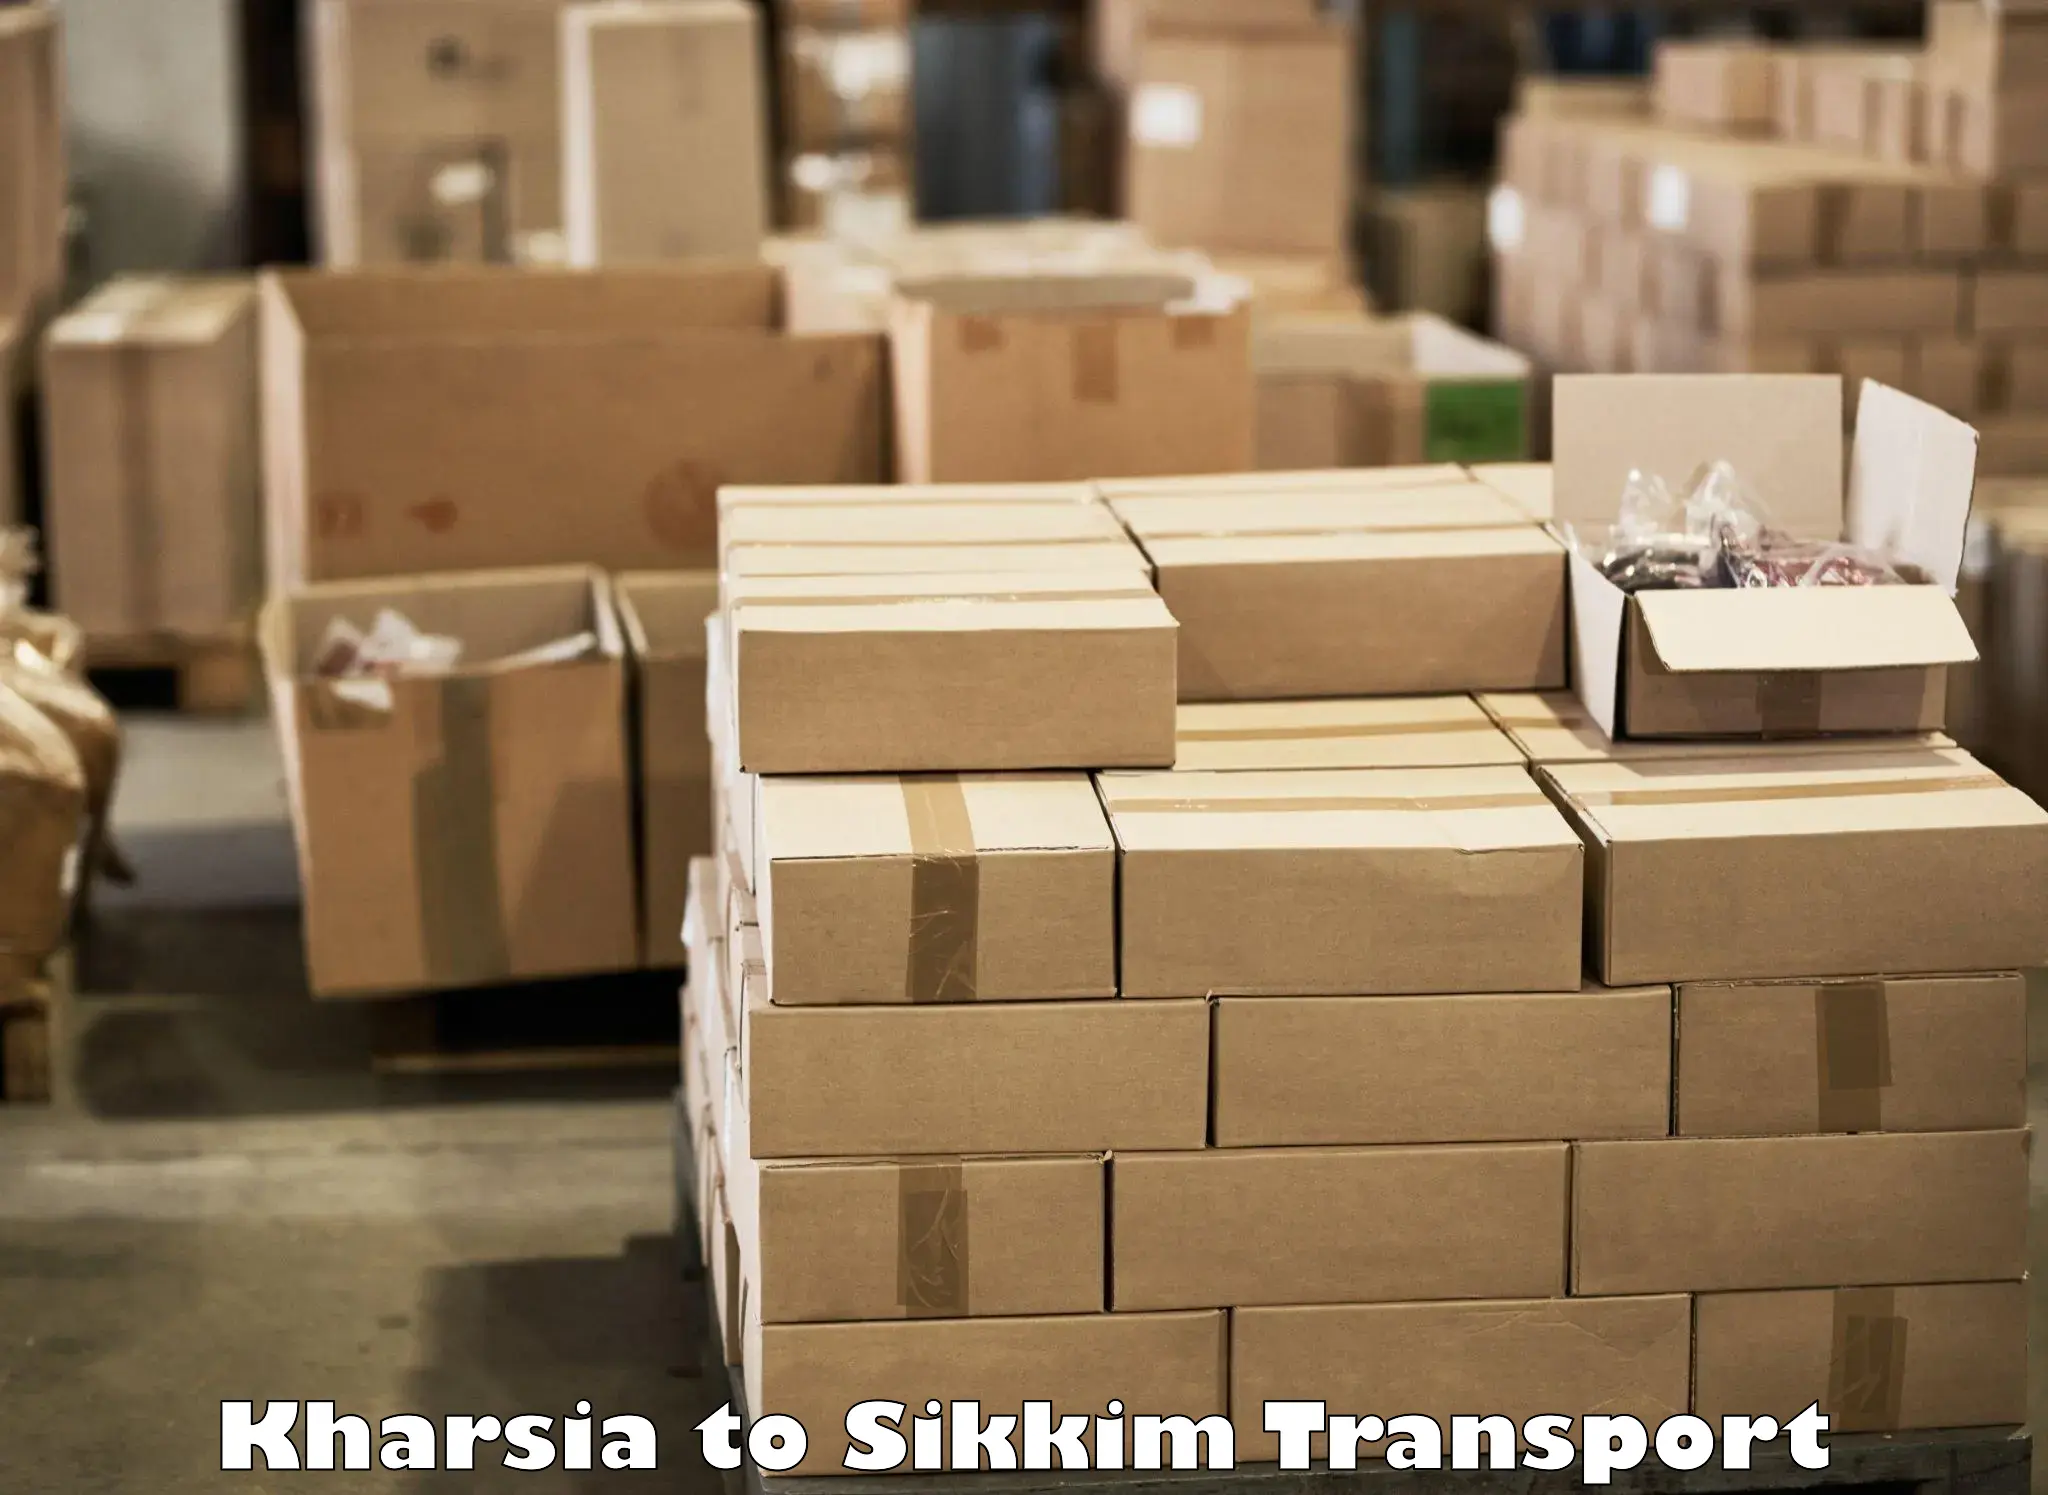 Vehicle transport services Kharsia to Pelling